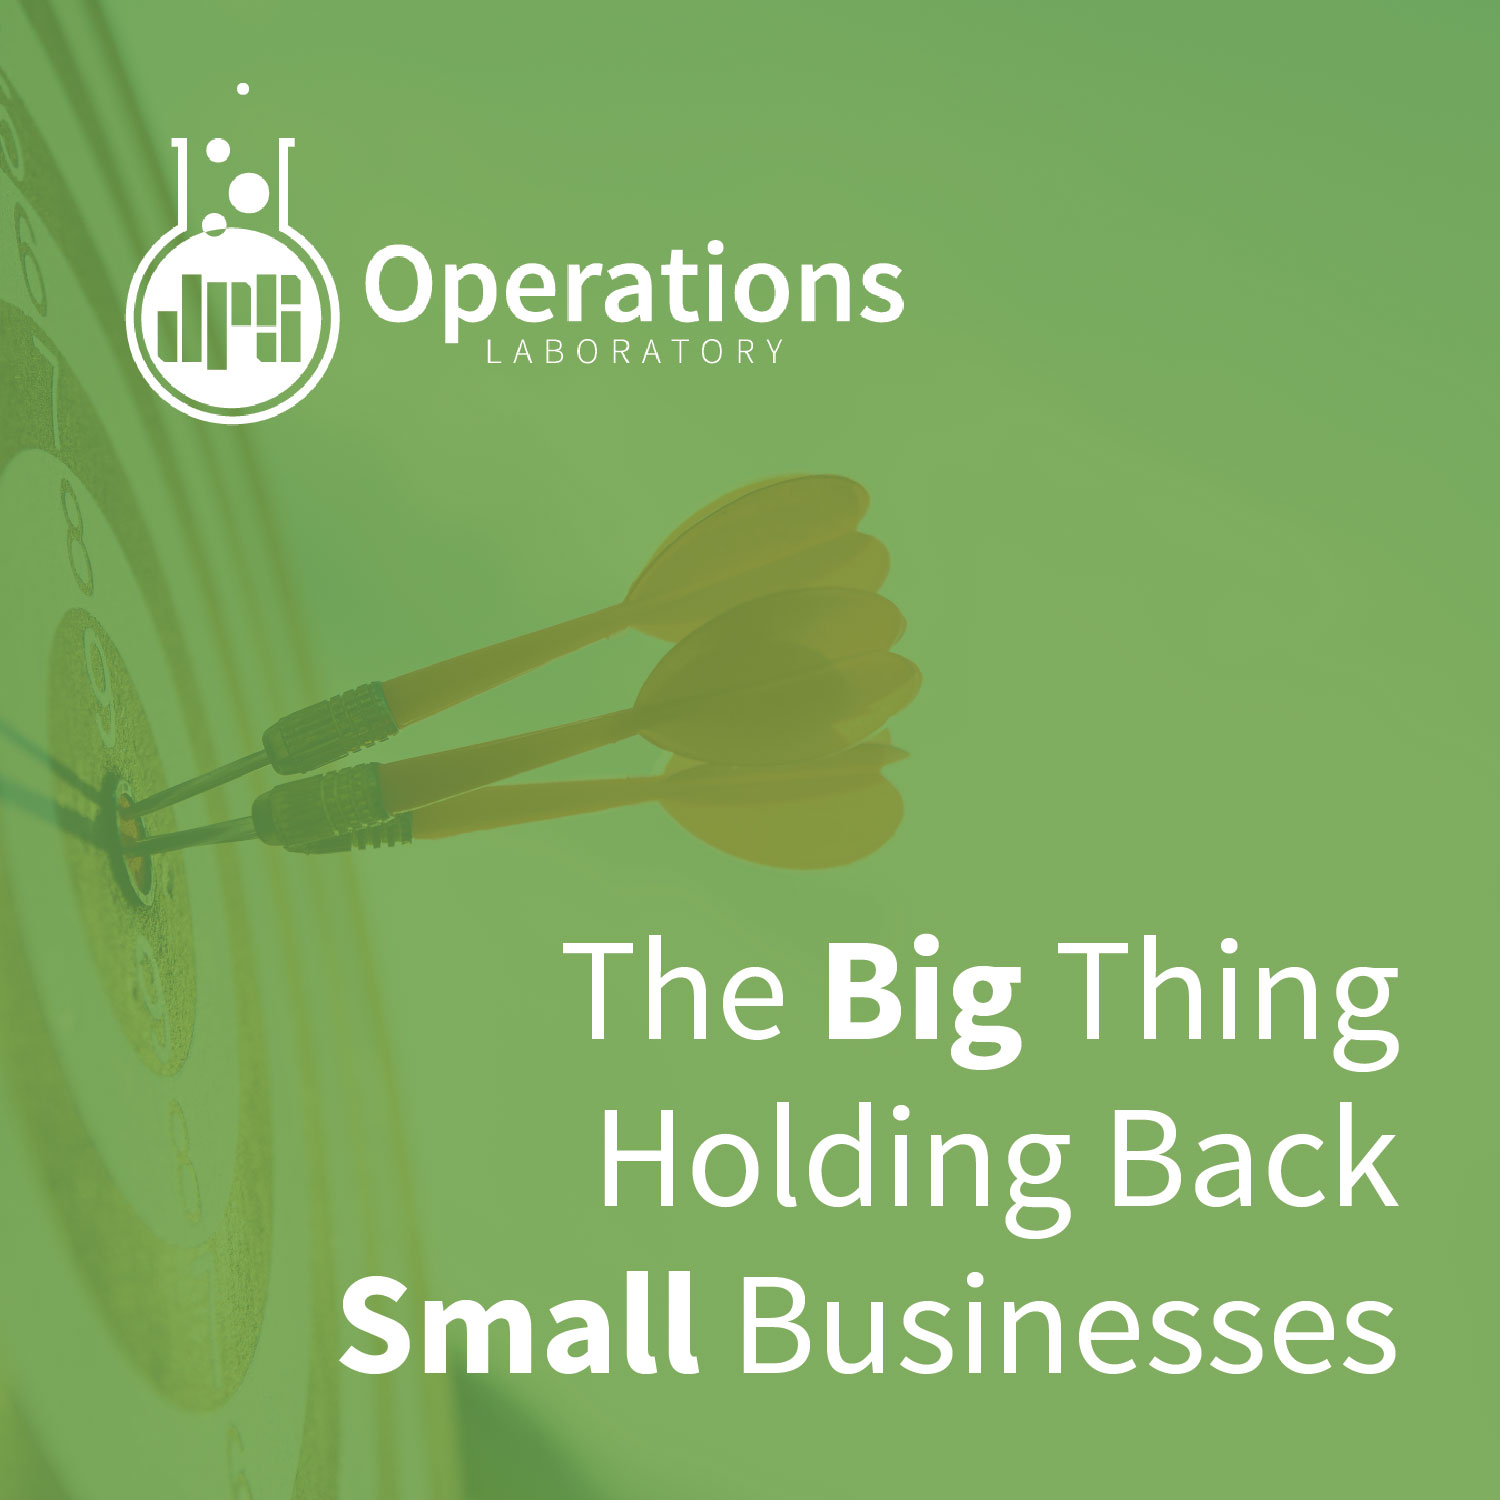 The Big Thing Holding Back Small Businesses